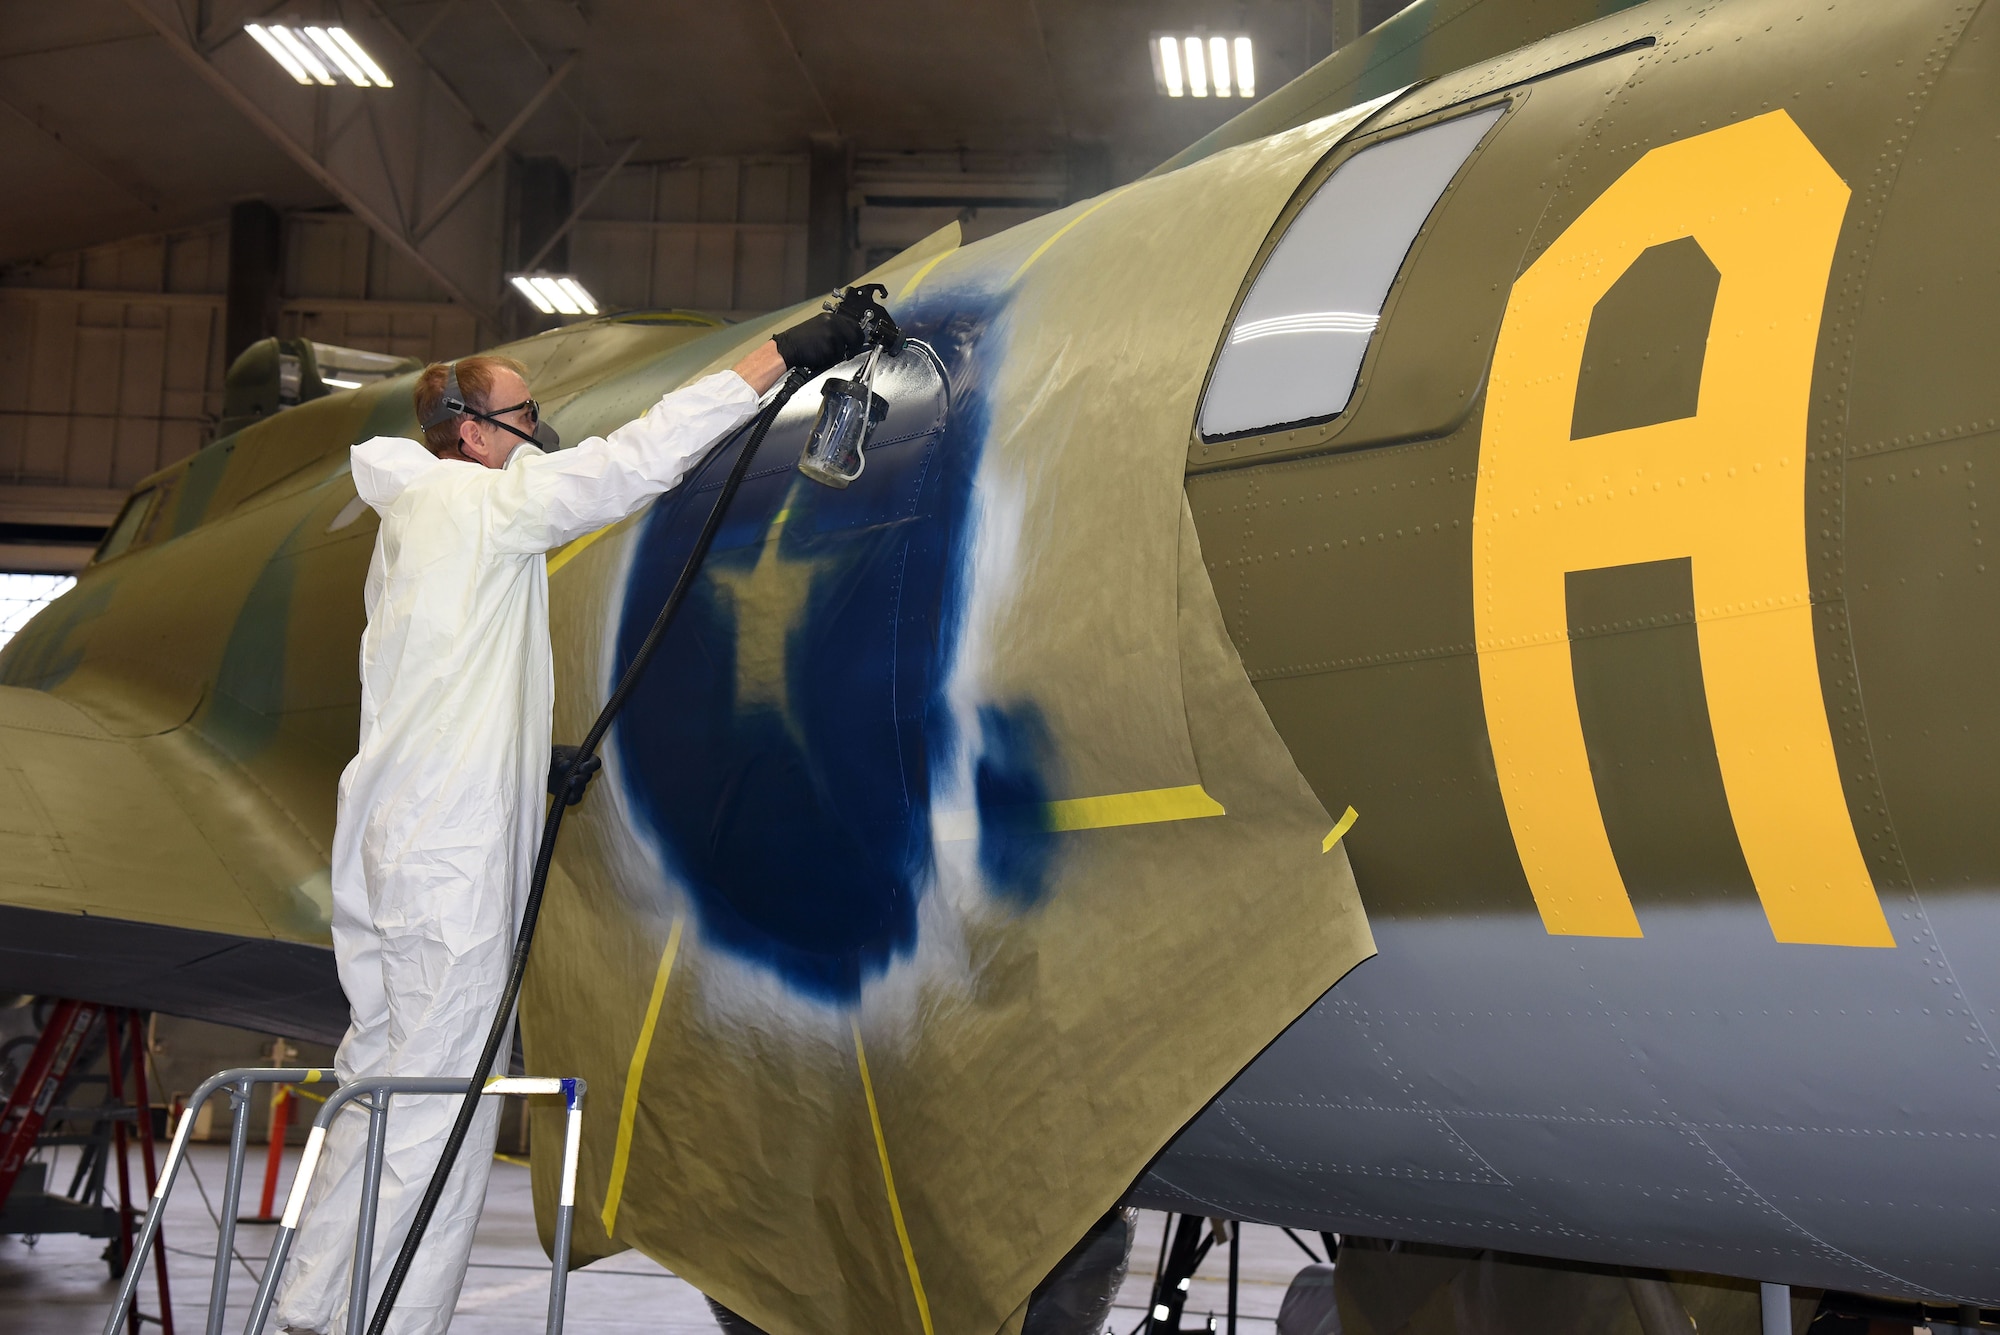 DAYTON, Ohio (12/06/2017) -- National Museum of the U.S. Air Force restoration crews continue the painting process on the Boeing B-17F Memphis Belle™. Plans call for the aircraft to be placed on permanent public display in the WWII Gallery here at the National Museum of the U.S. Air Force on May 17, 2018. (U.S. Air Force photo by Ken LaRock)